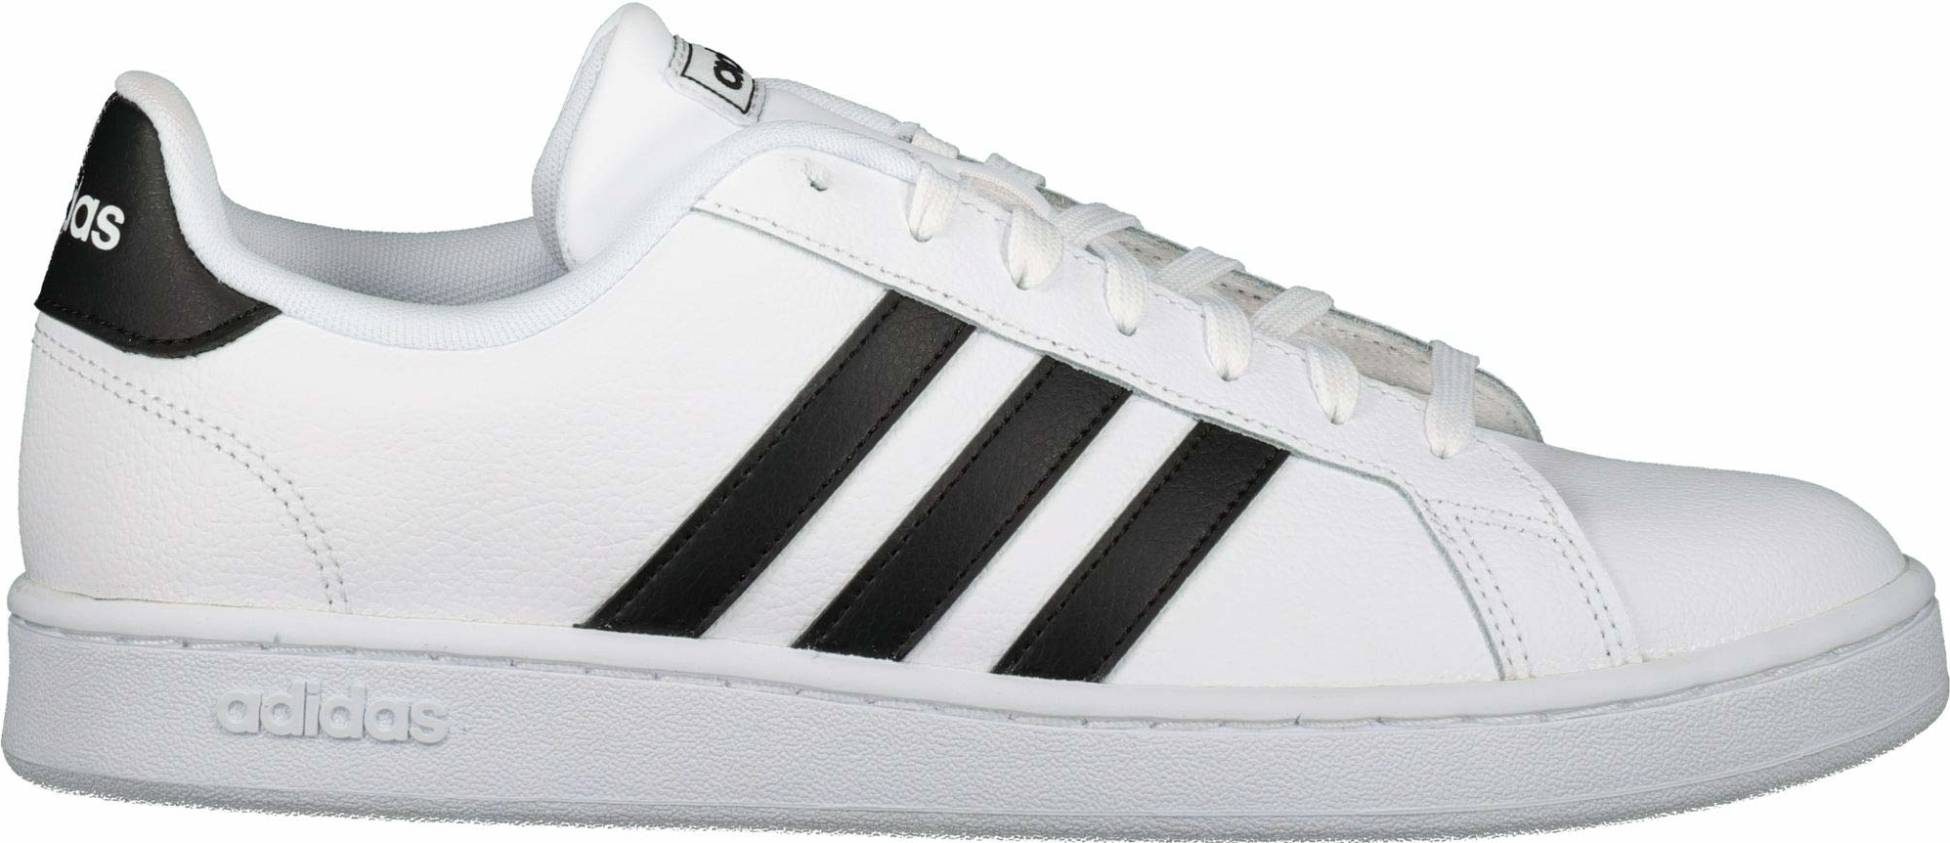 Adidas Grand Court sneakers in 10 colors (only $45) | RunRepeat